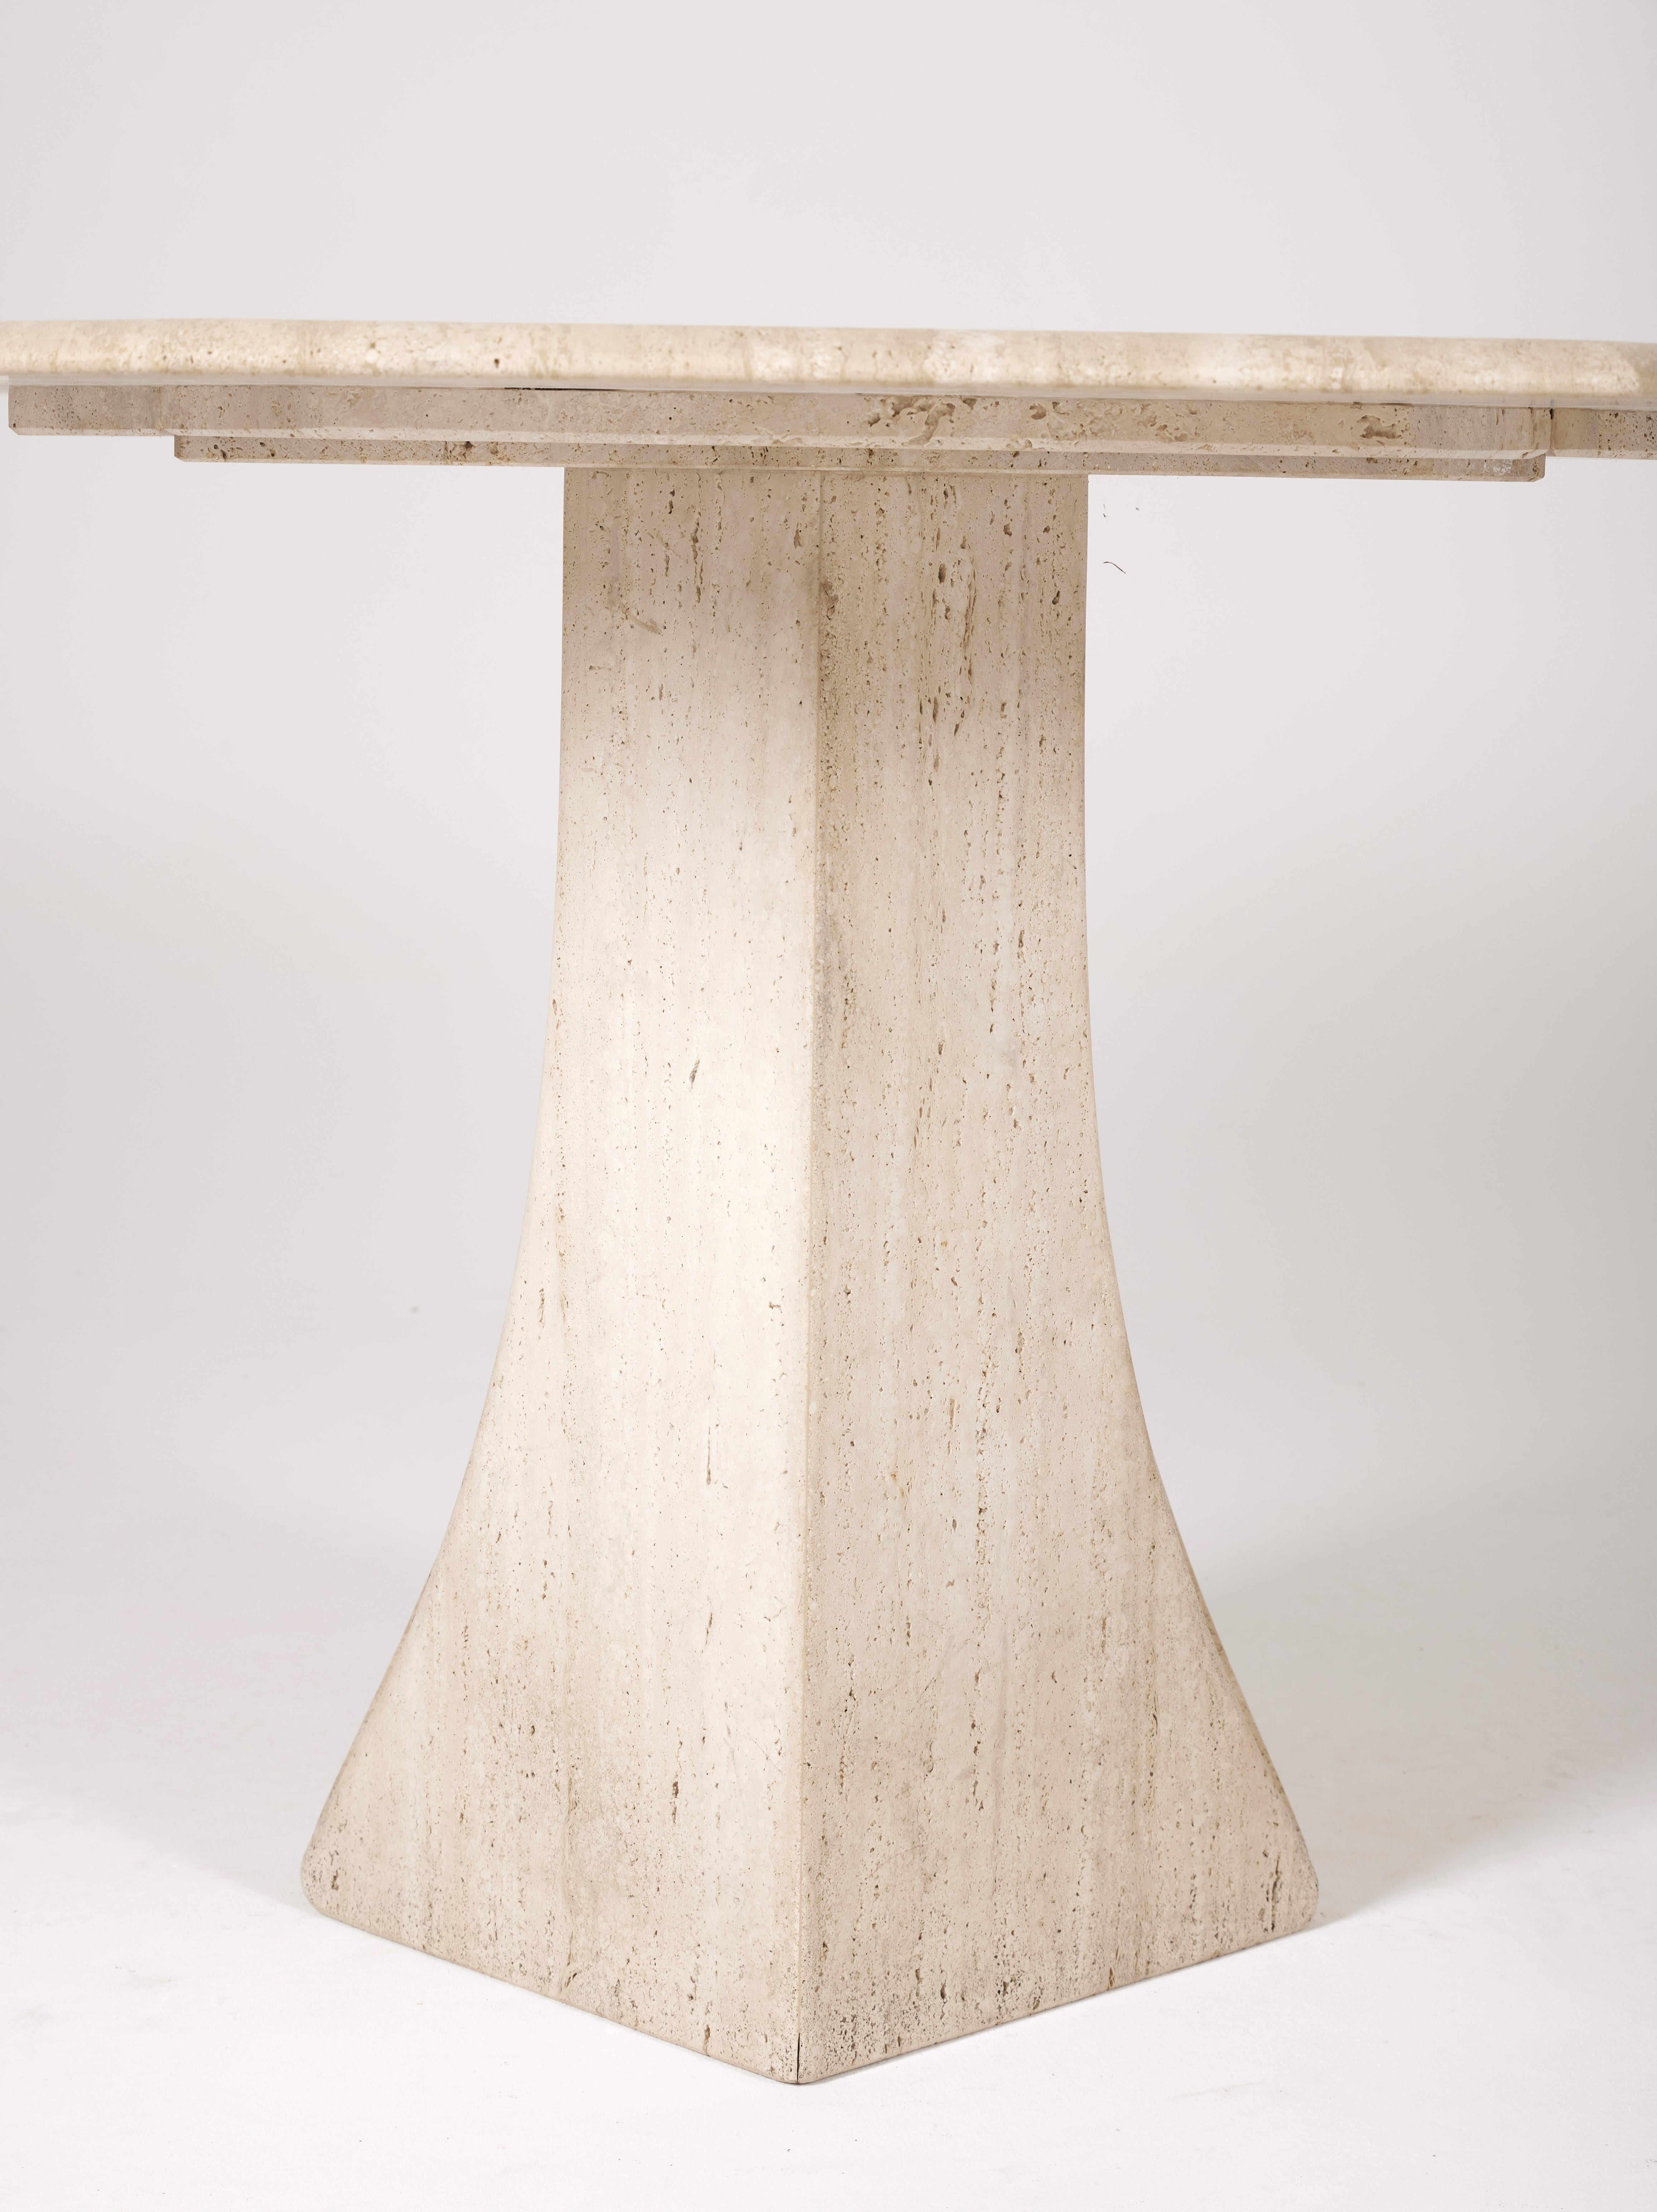 Travertine Octagonal dining table Italy 1970s 